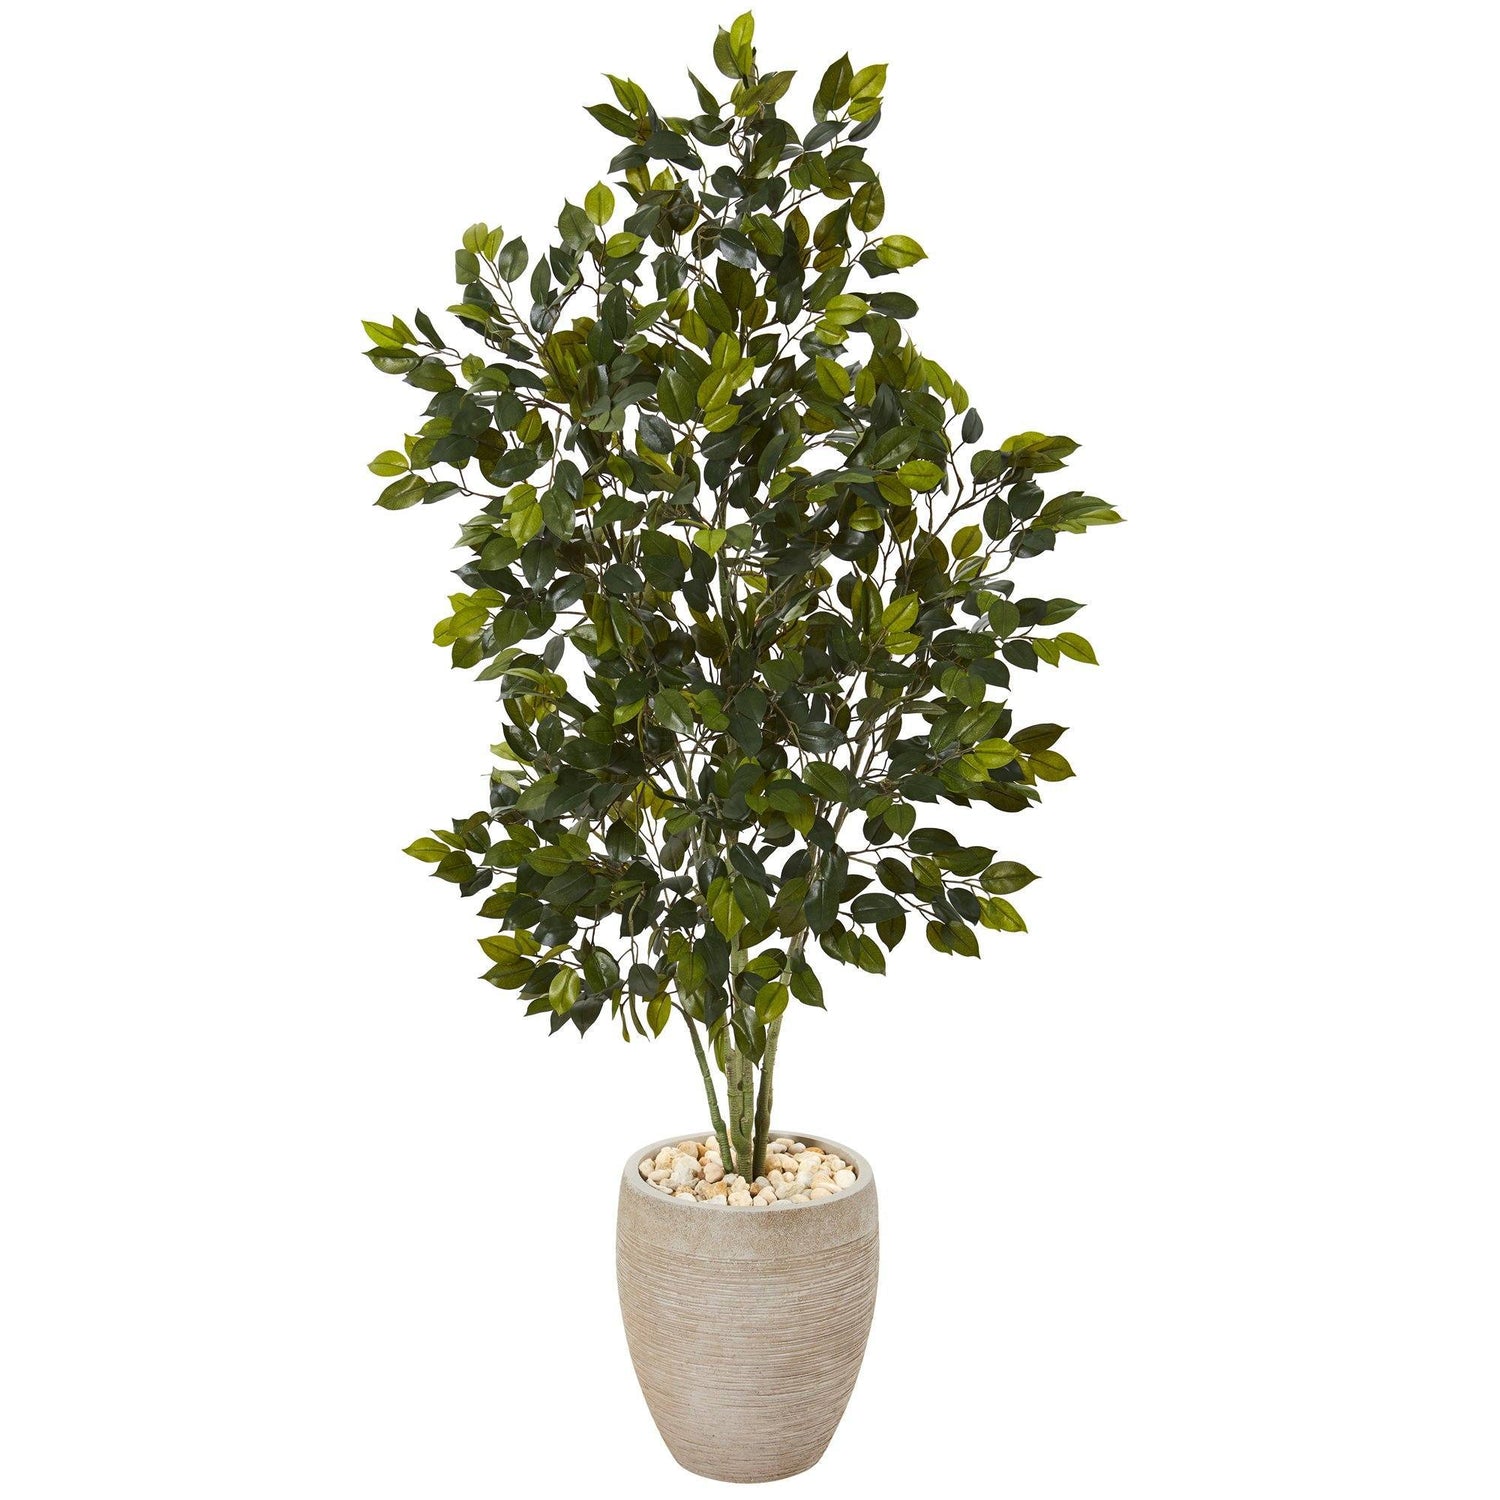 53” Ficus Artificial Tree in Sand Colored Planter